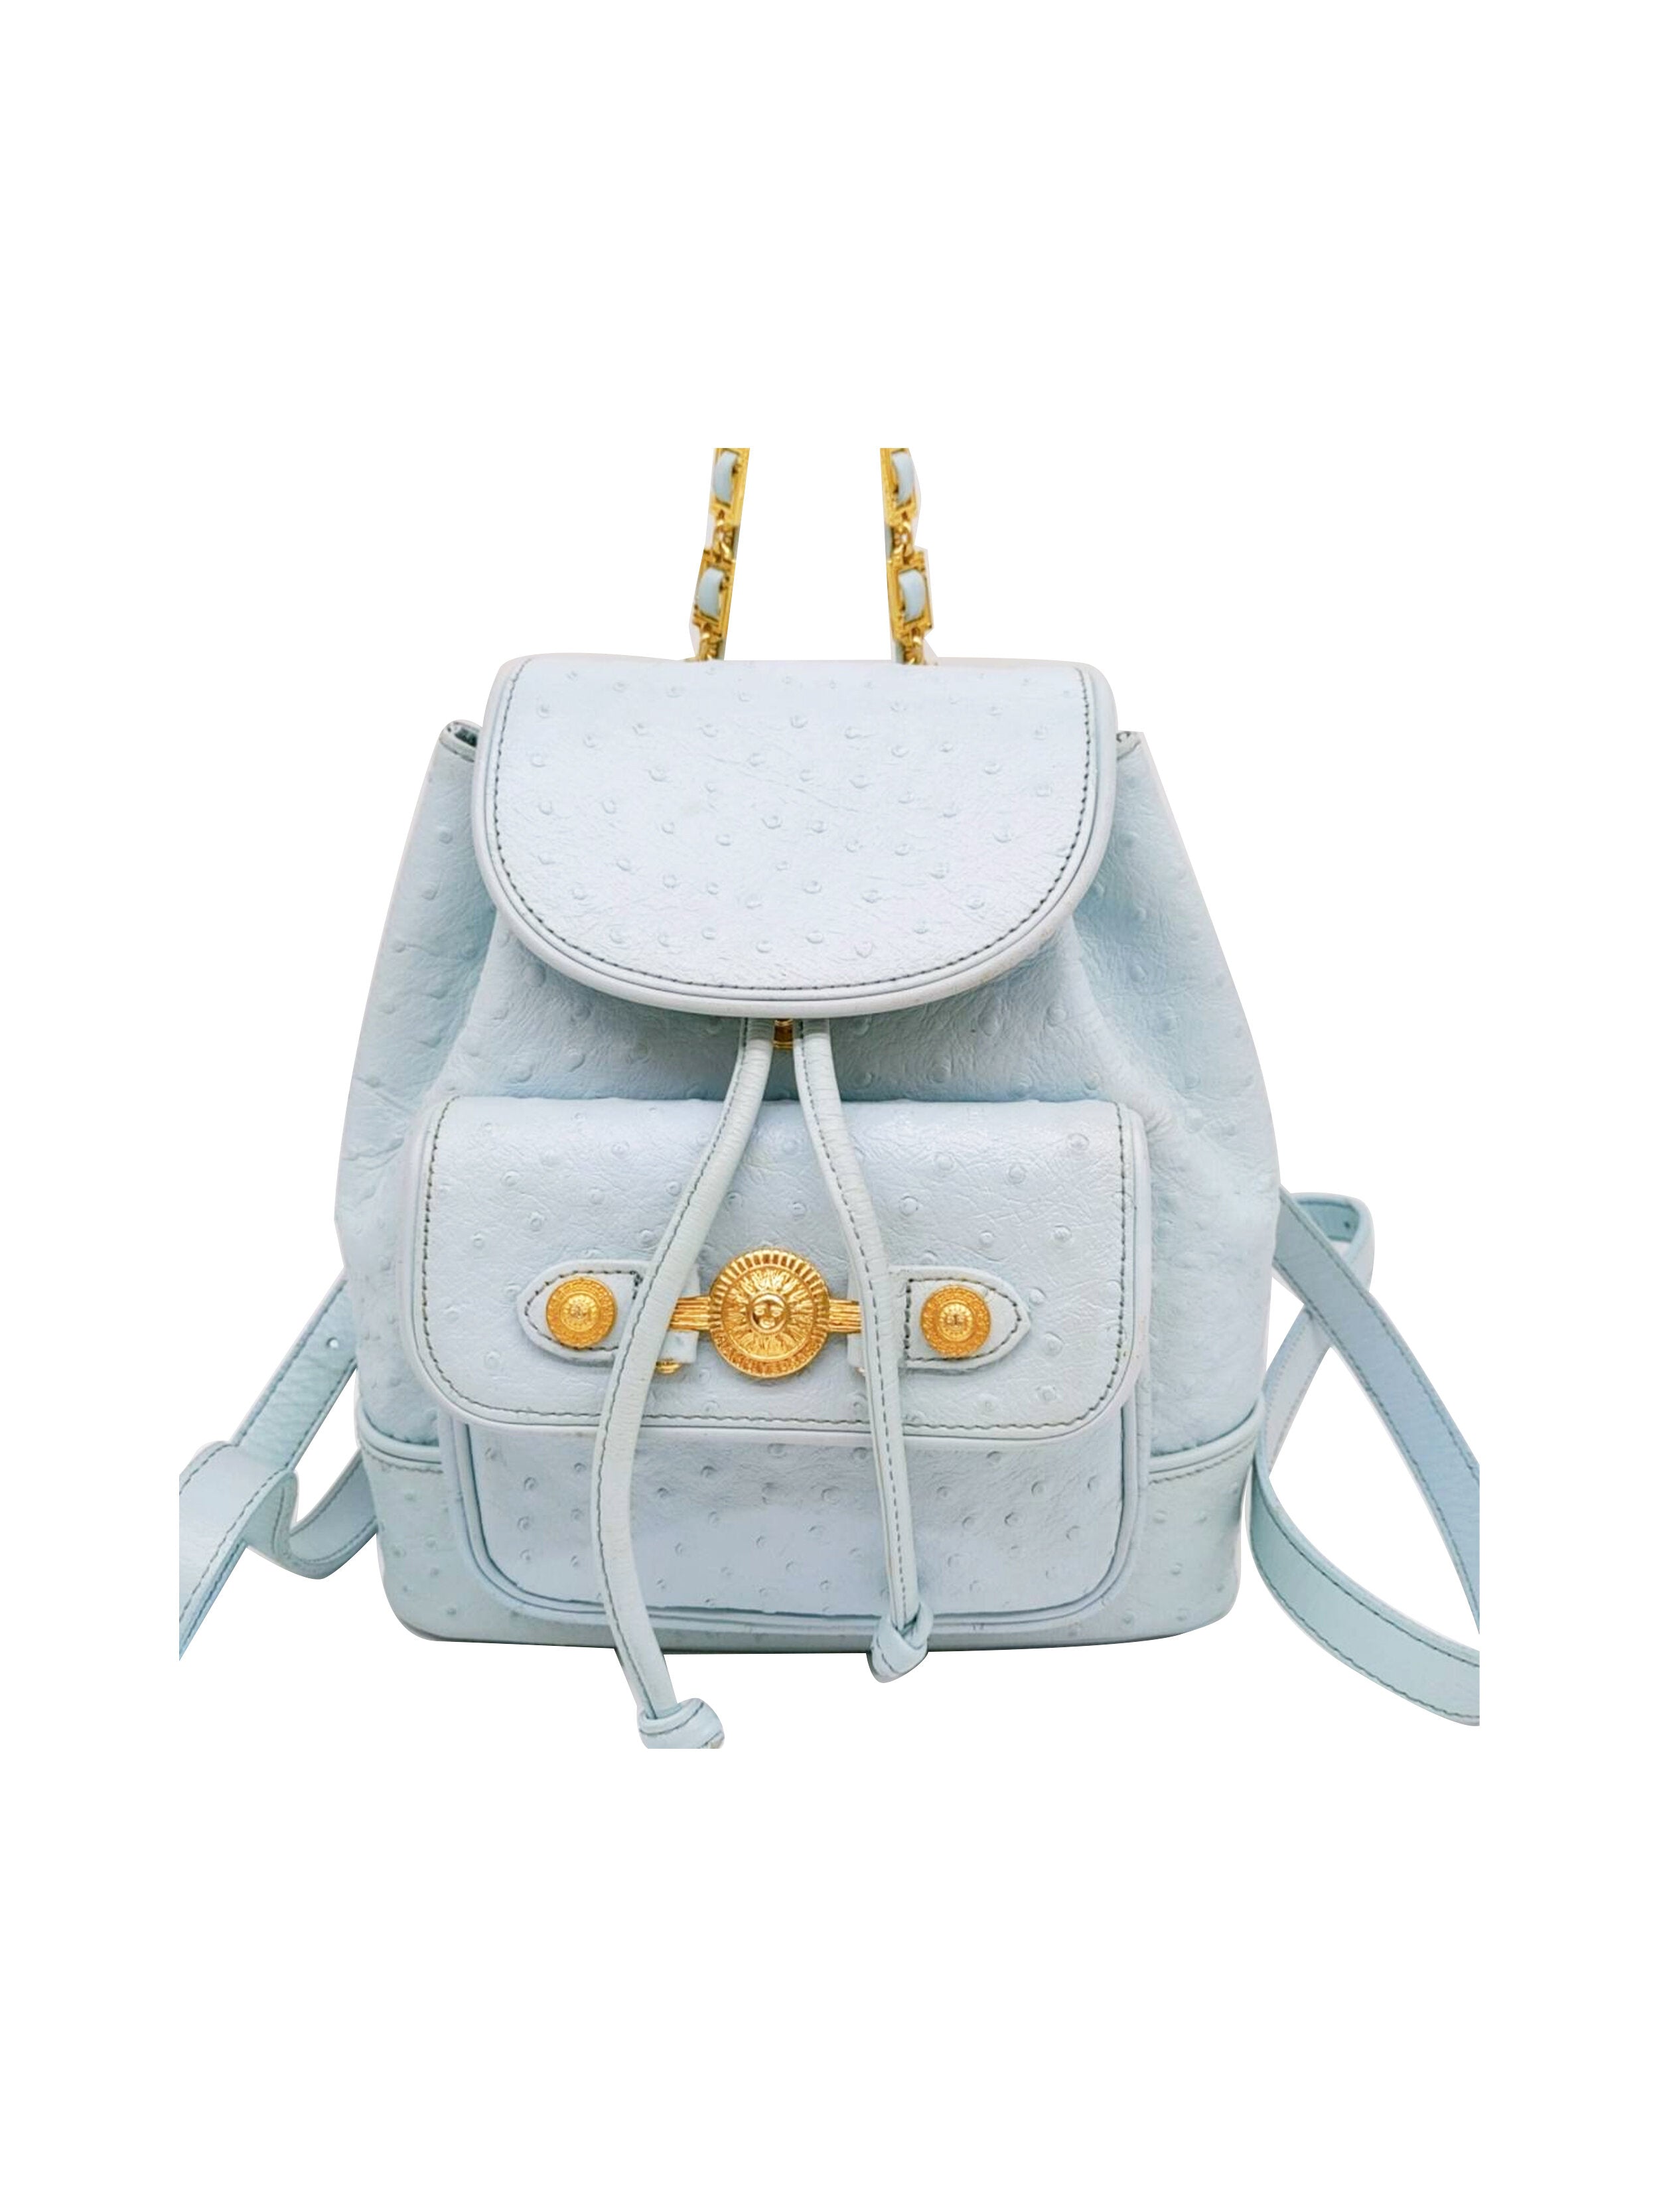 Versace 2000s Blue Ostrich Leather Backpack